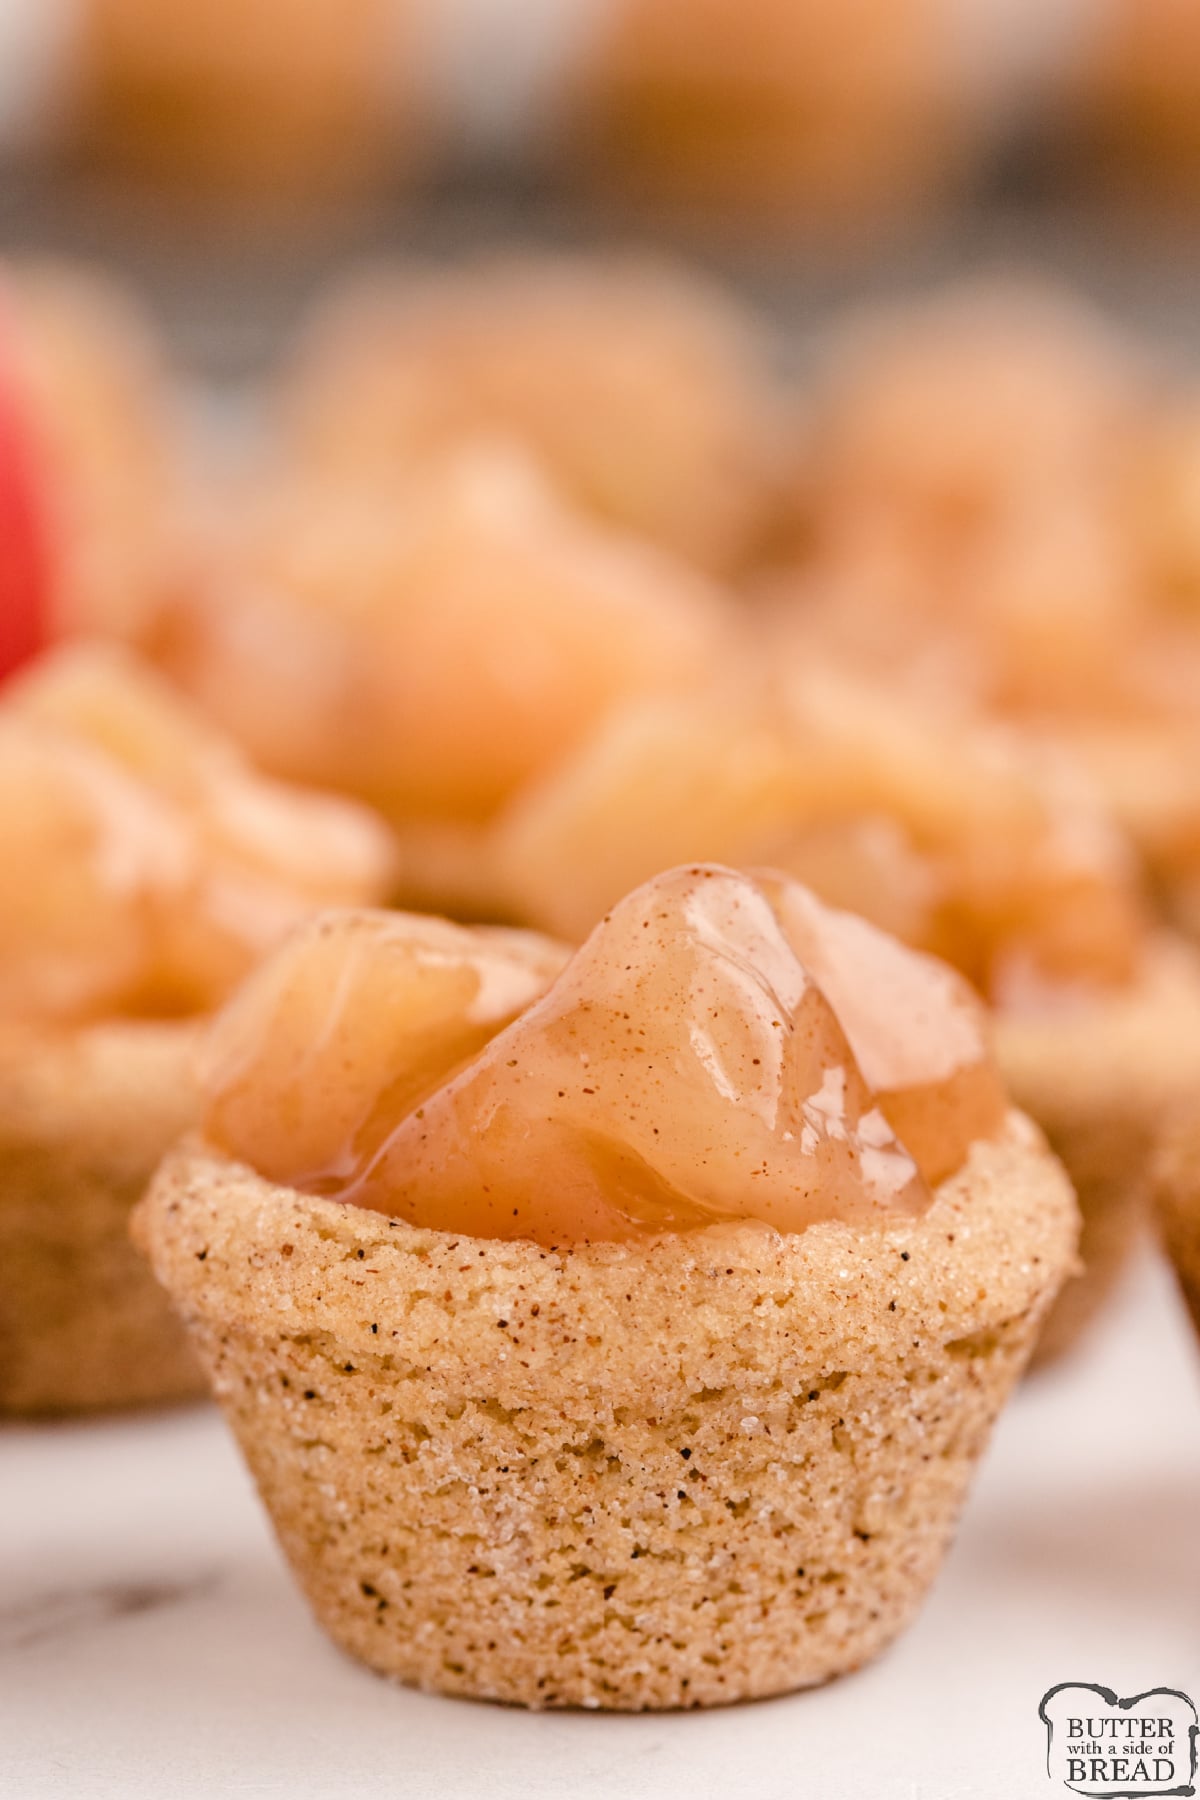 Snickerdoodle Apple Pie Bites are the perfect dessert to take to all of those holiday parties. These mini apple pies are easily made with a snickerdoodle cookie mix and a can of apple pie filling.